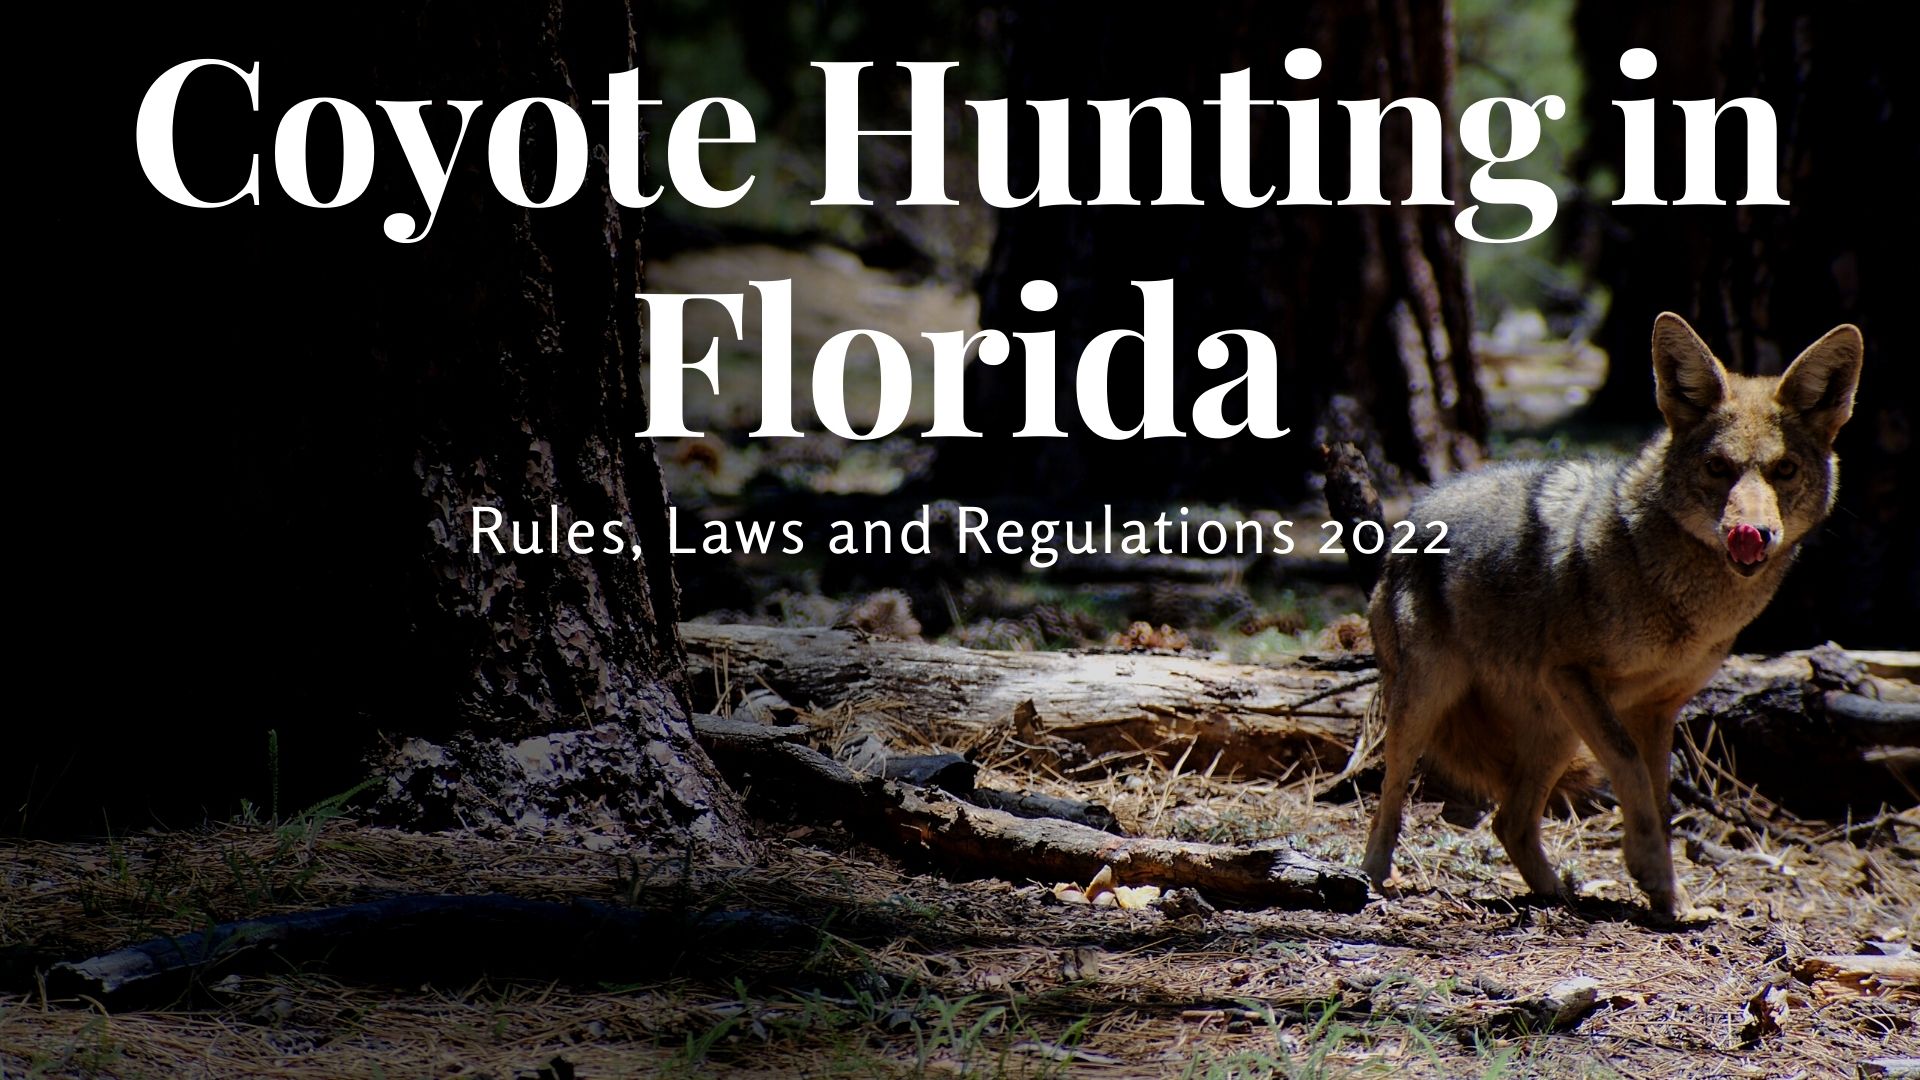 Coyote Hunting in Florida